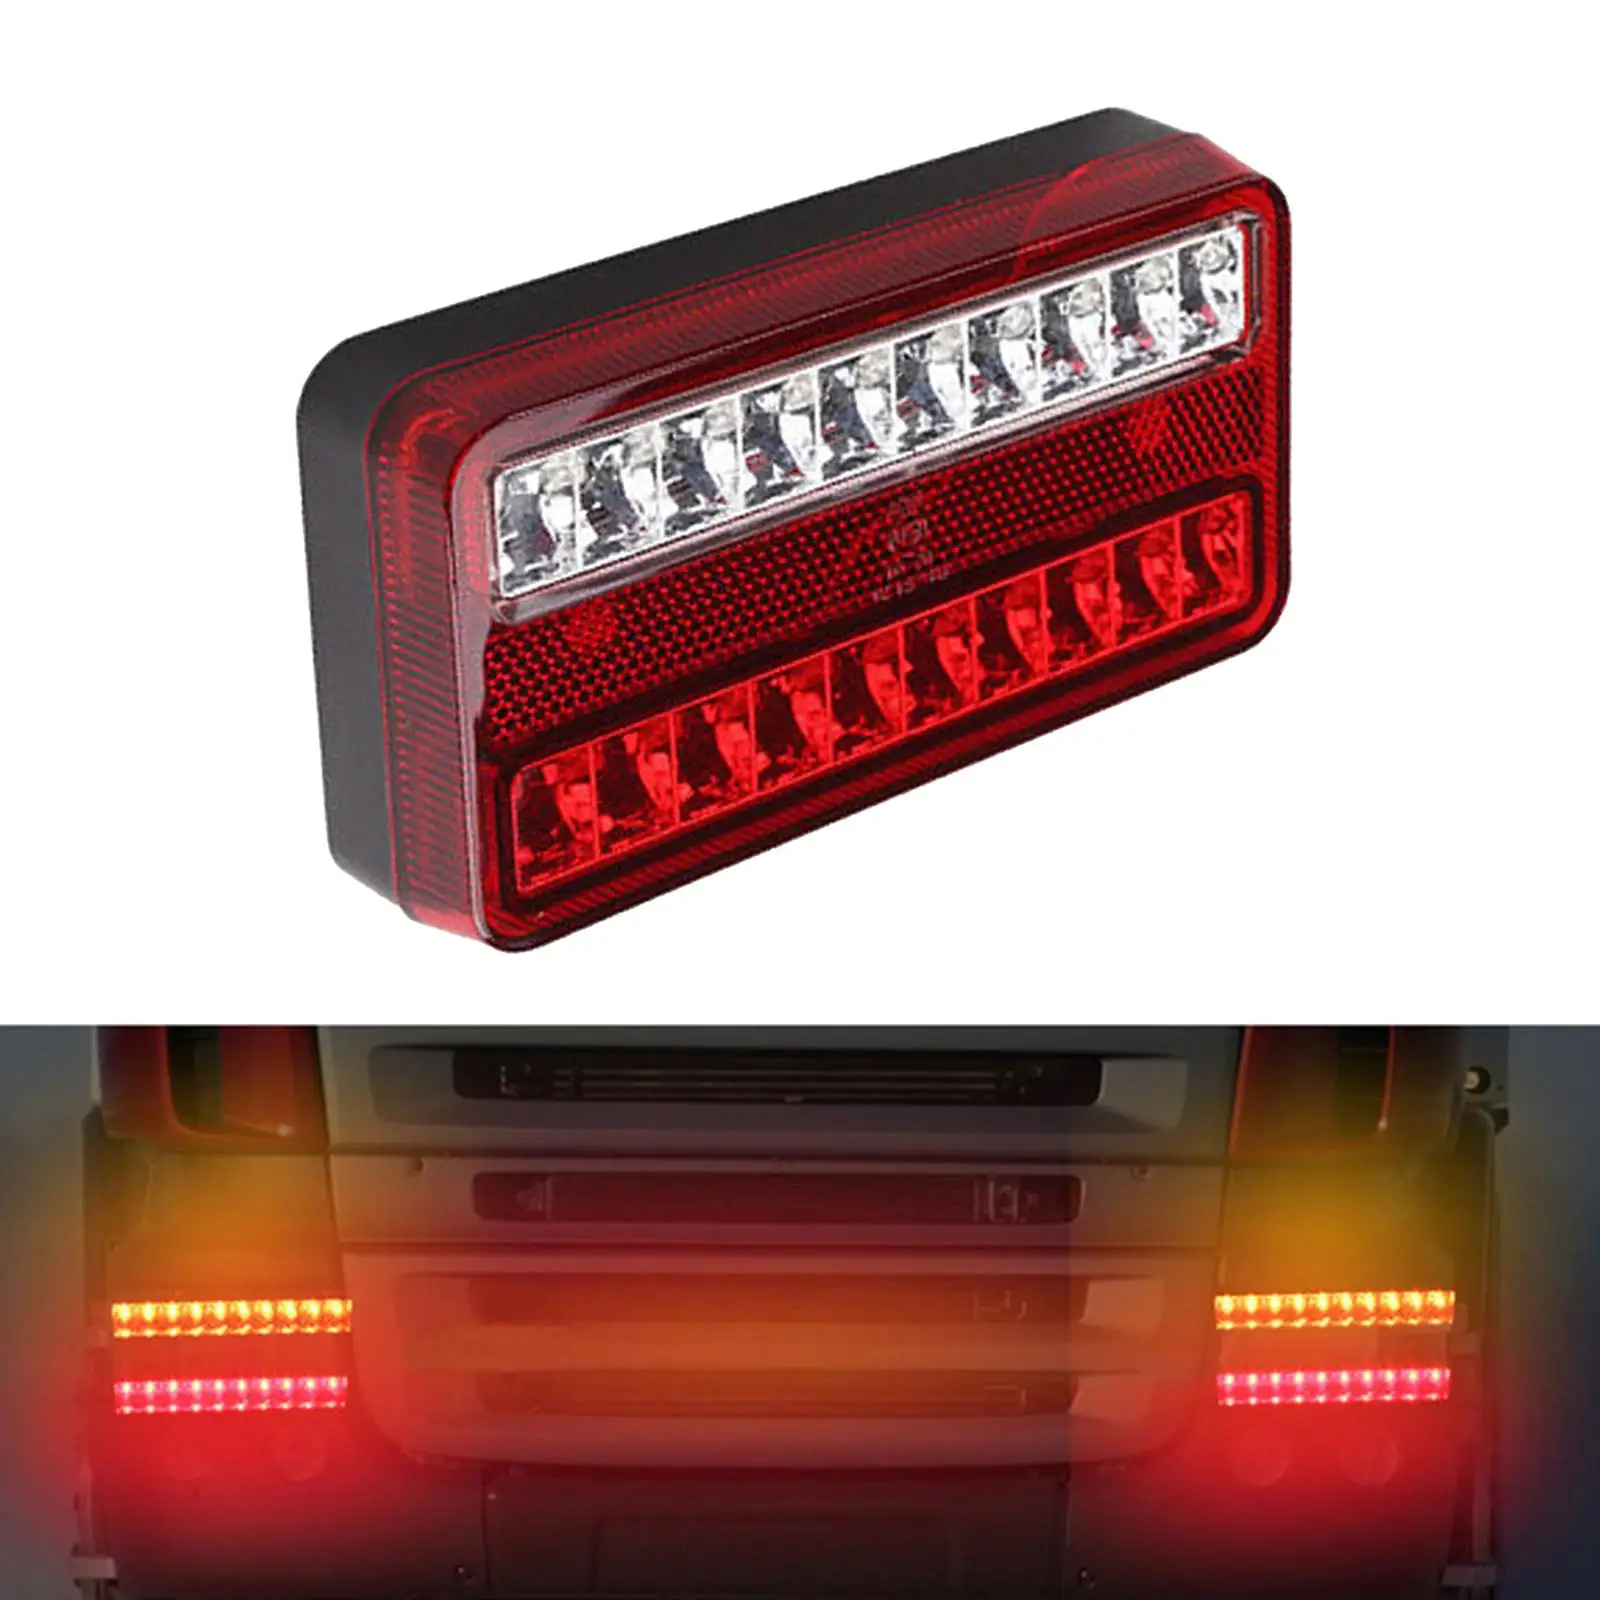 Portable Indicator Tail Lights 12.8V Spare Parts Replaces LED Waterproof 300LM Rear Reverse Turn Signal Lamp for Camper Van